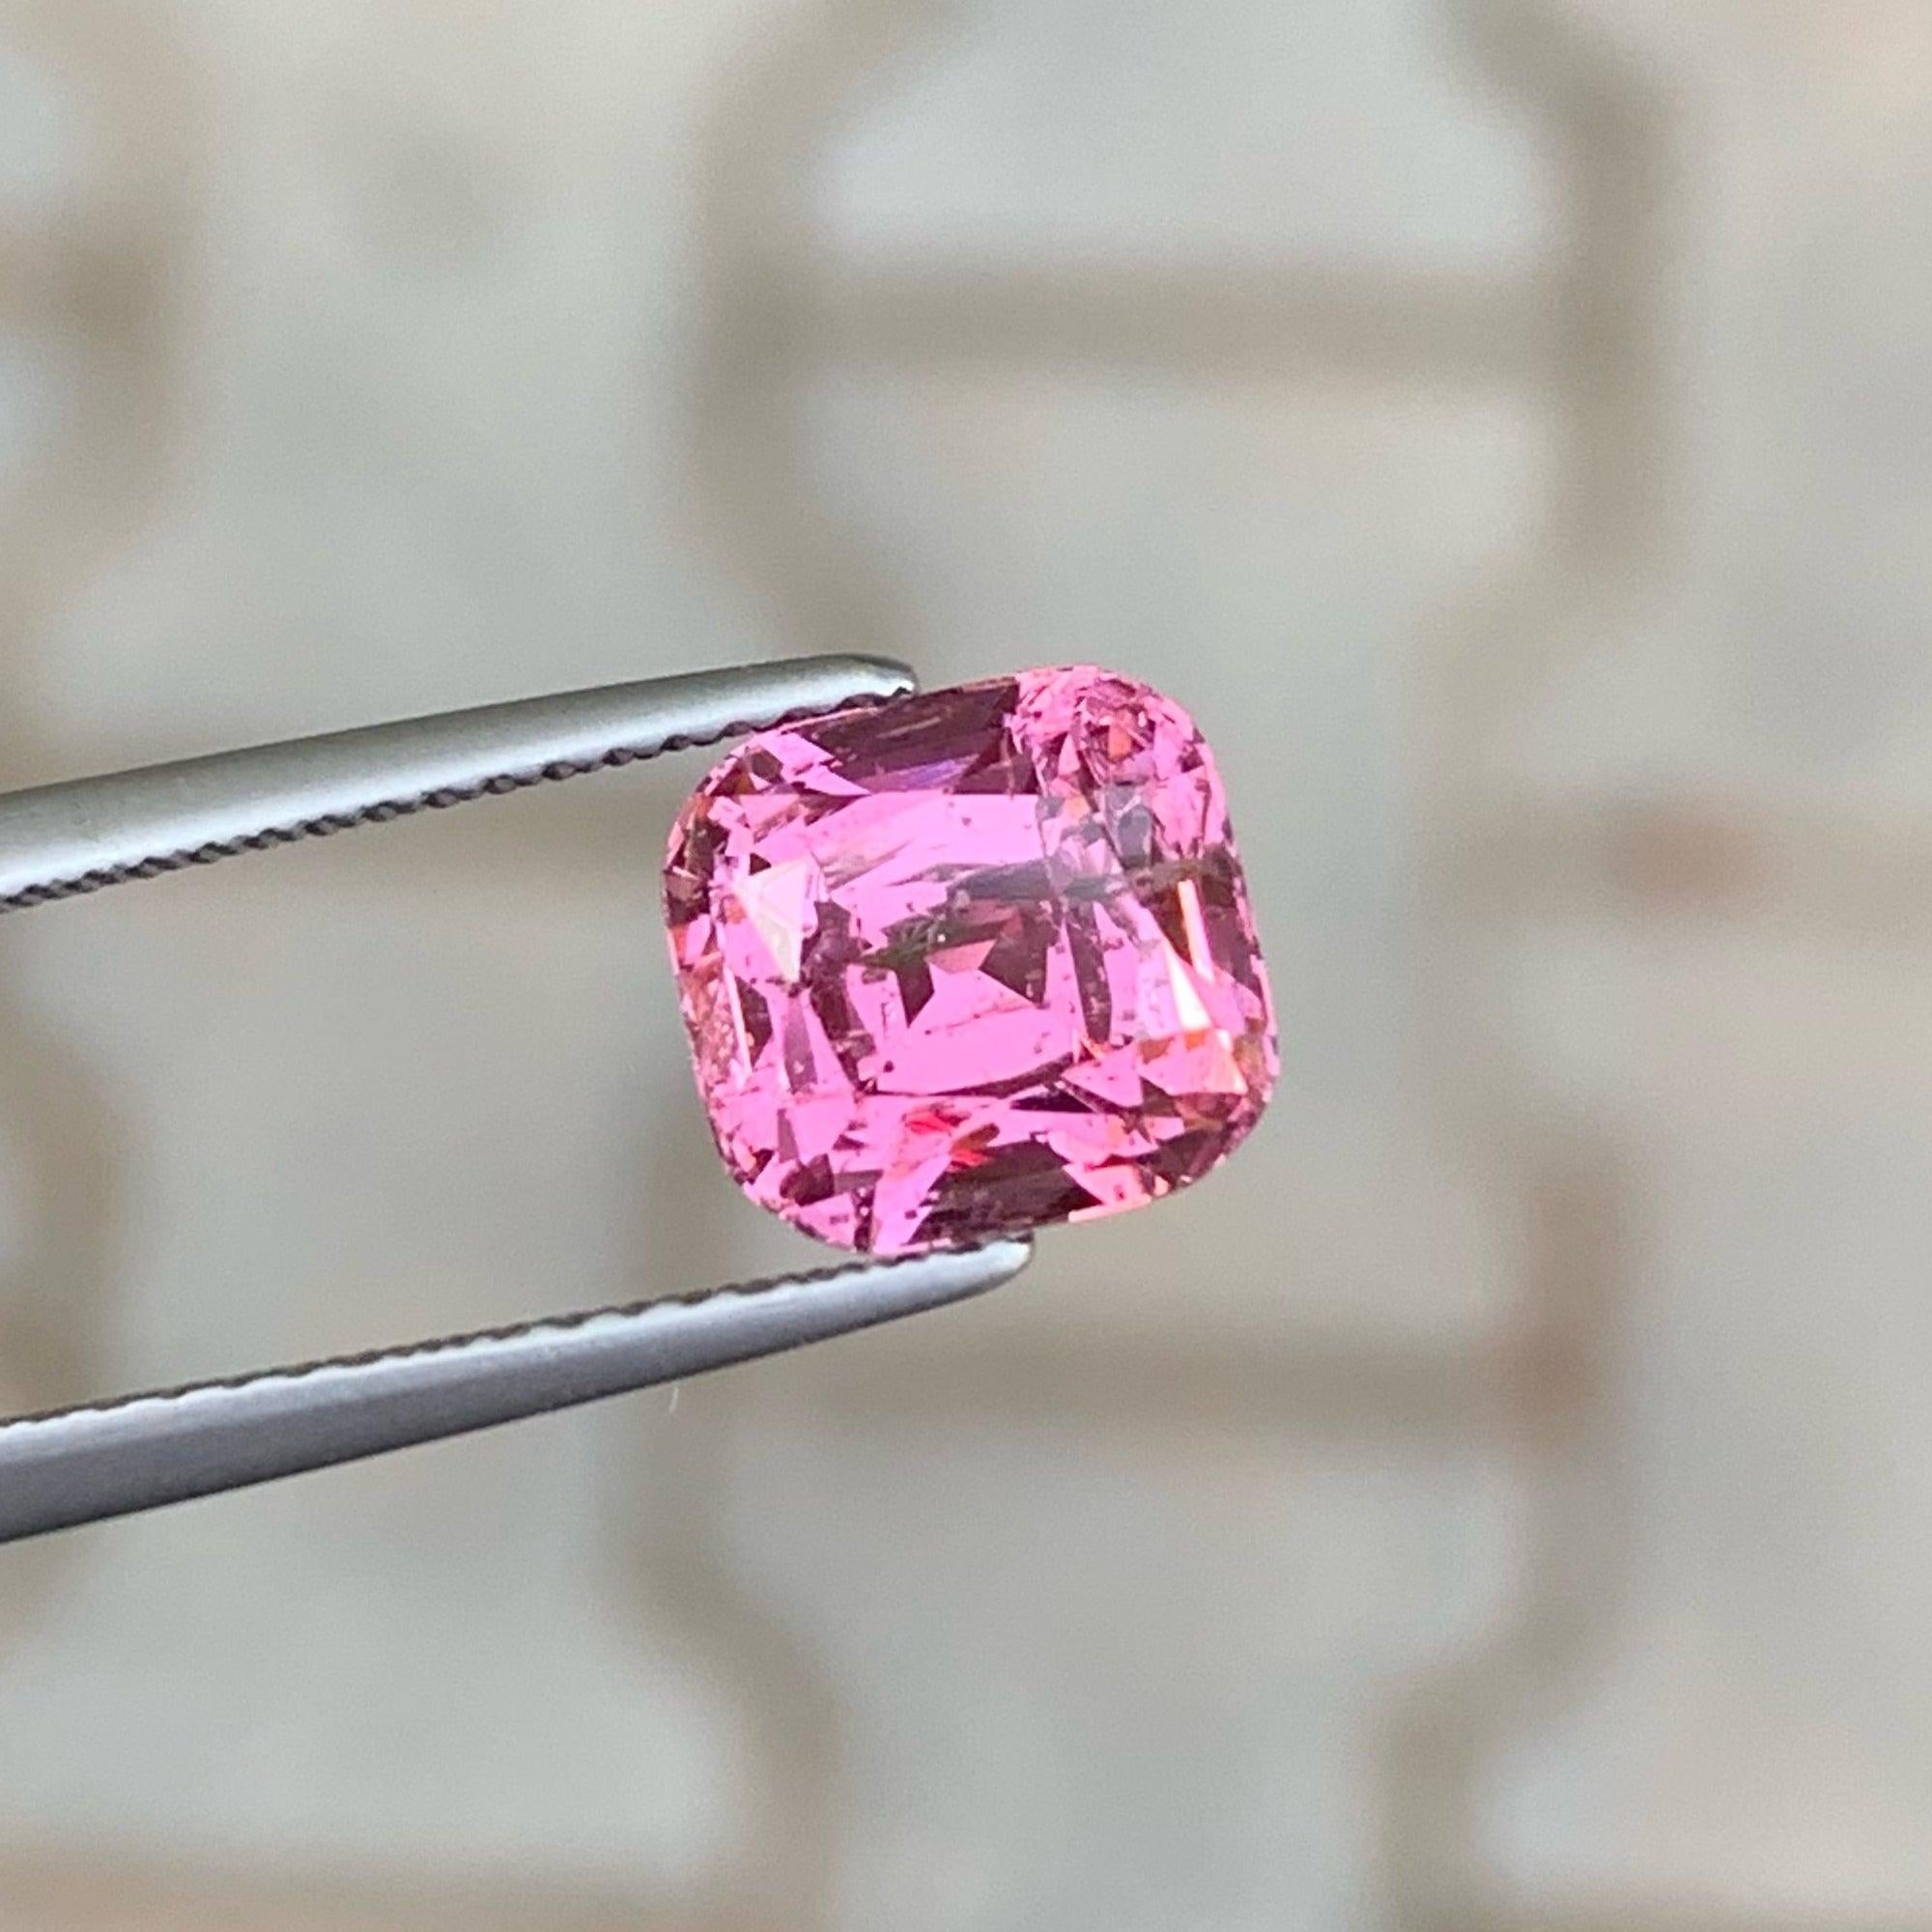 Modern Exquisite Sweet Pink Tourmaline Cut Stone 3.35 CTS Tourmaline Ring Faceted Stone For Sale